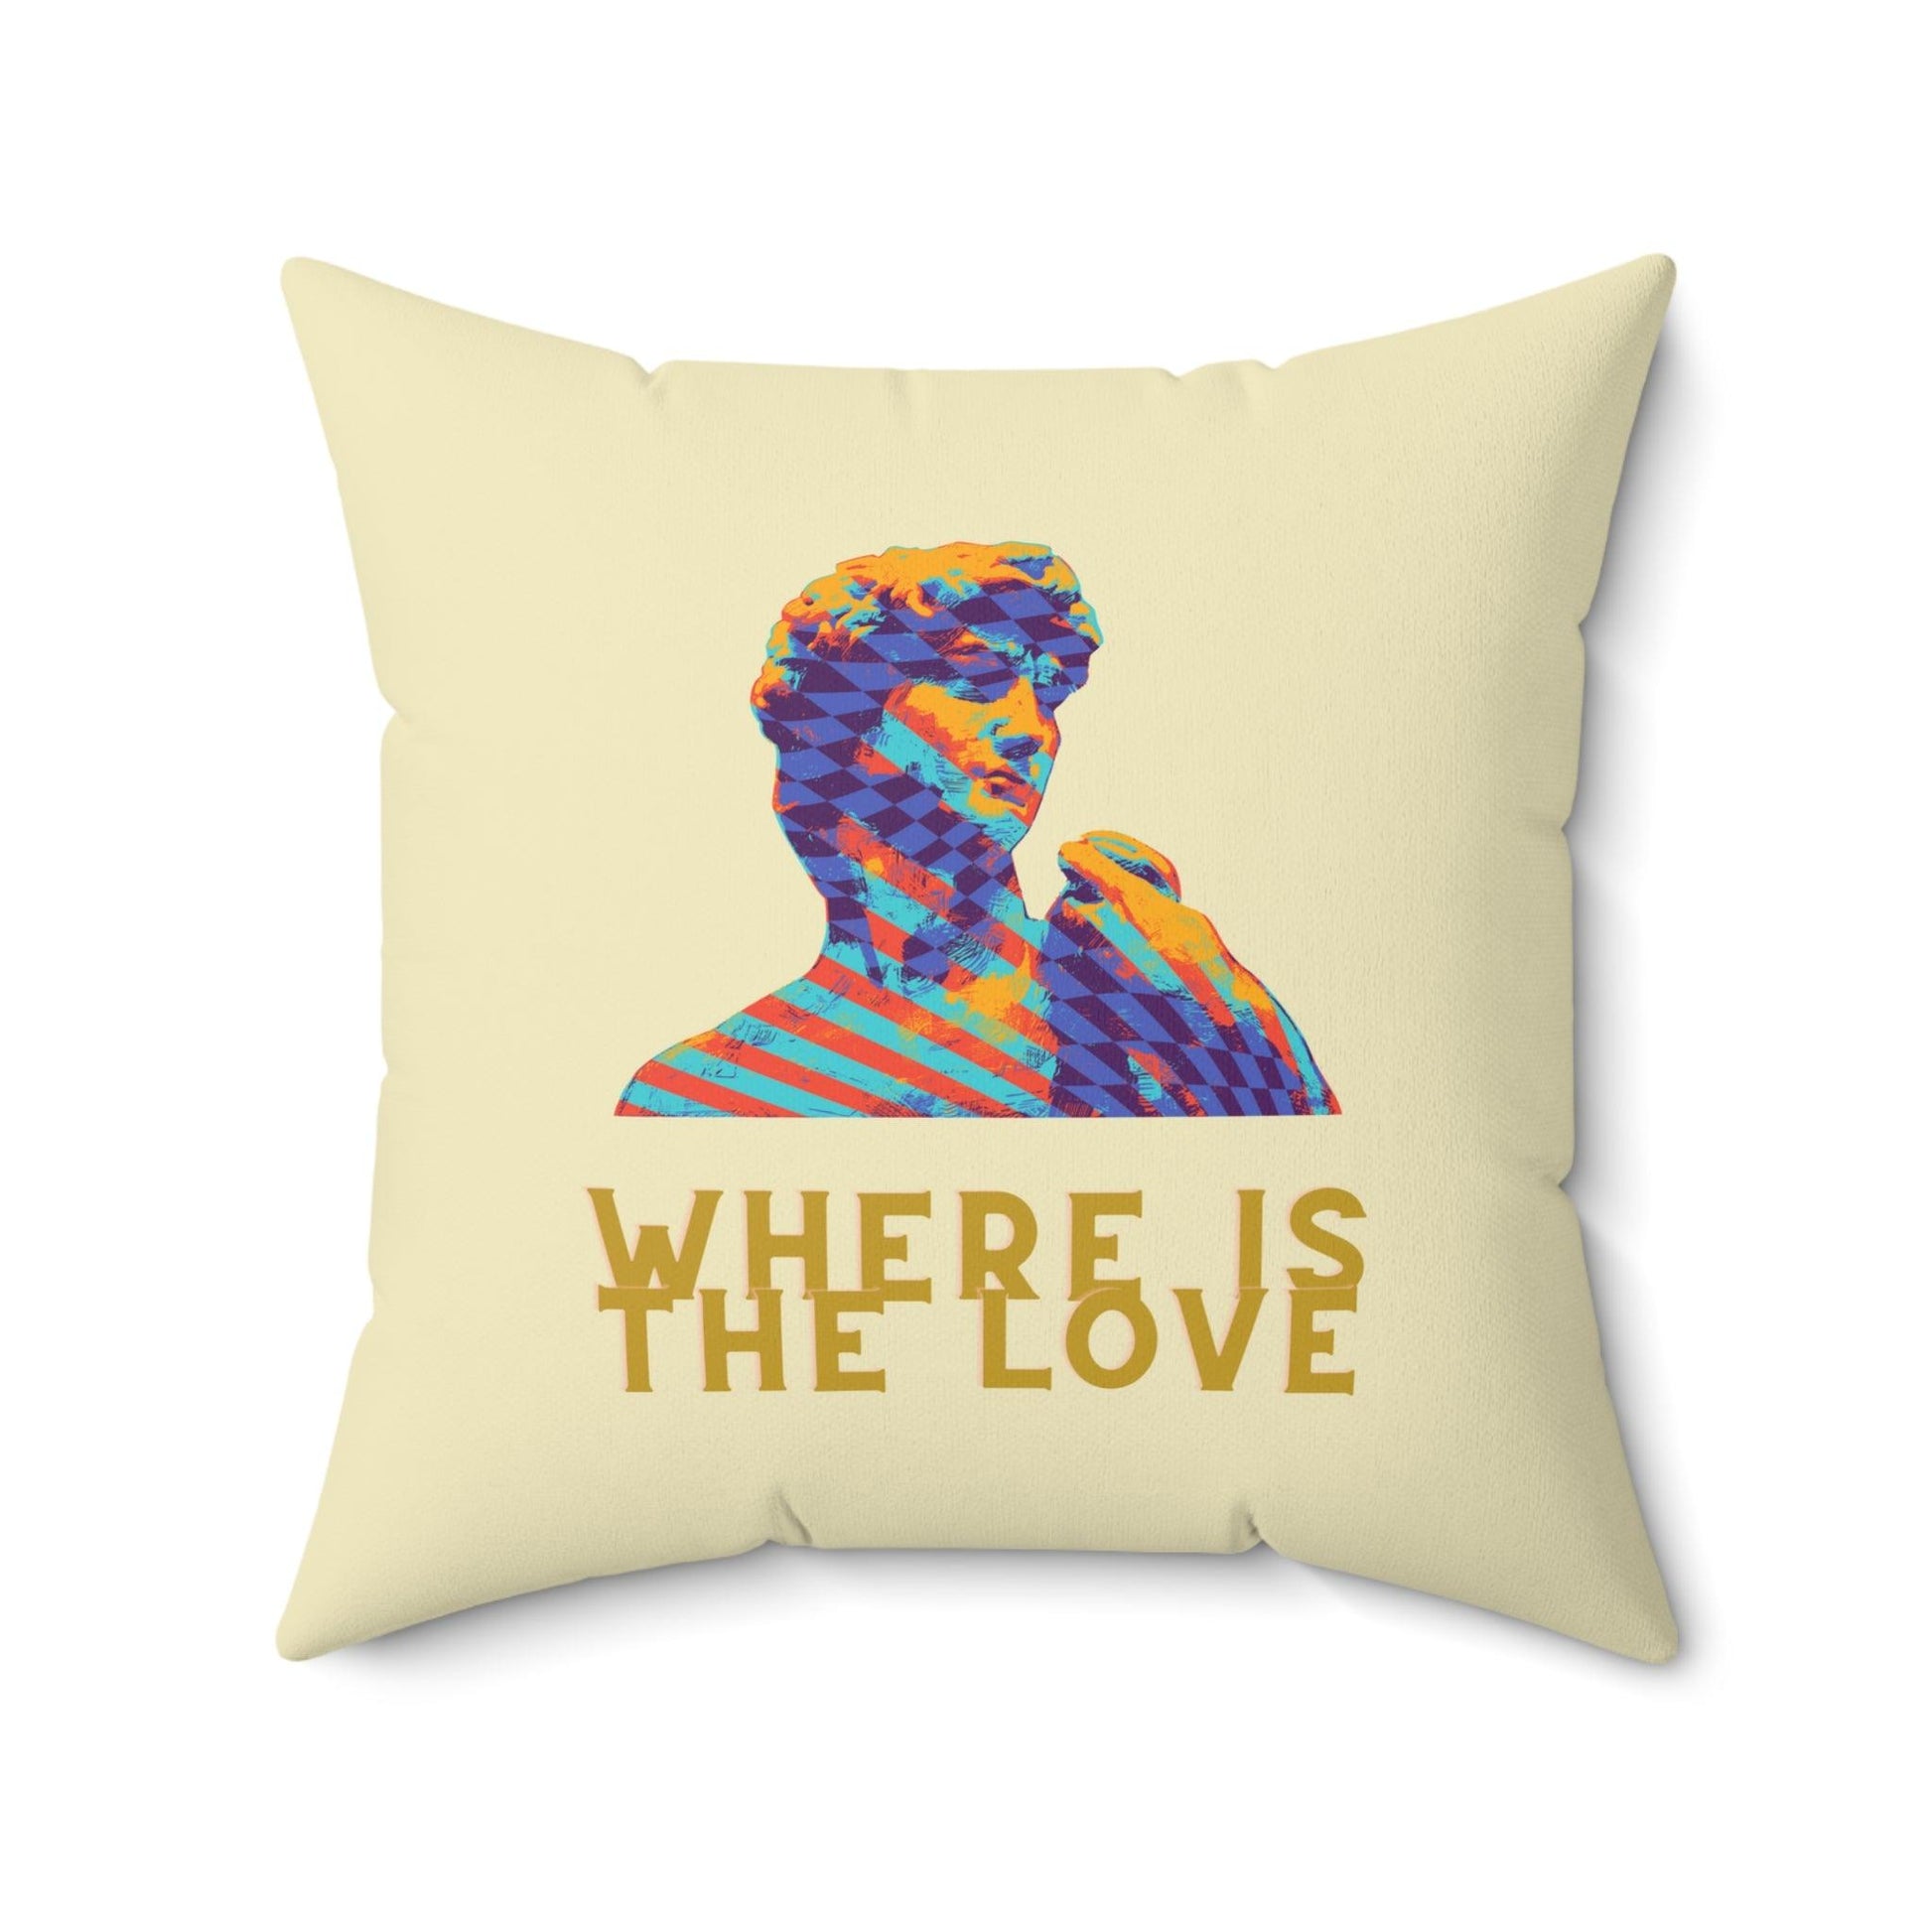 Where is the Love? David Bust Printed Throw Pillow - MAIA HOMES